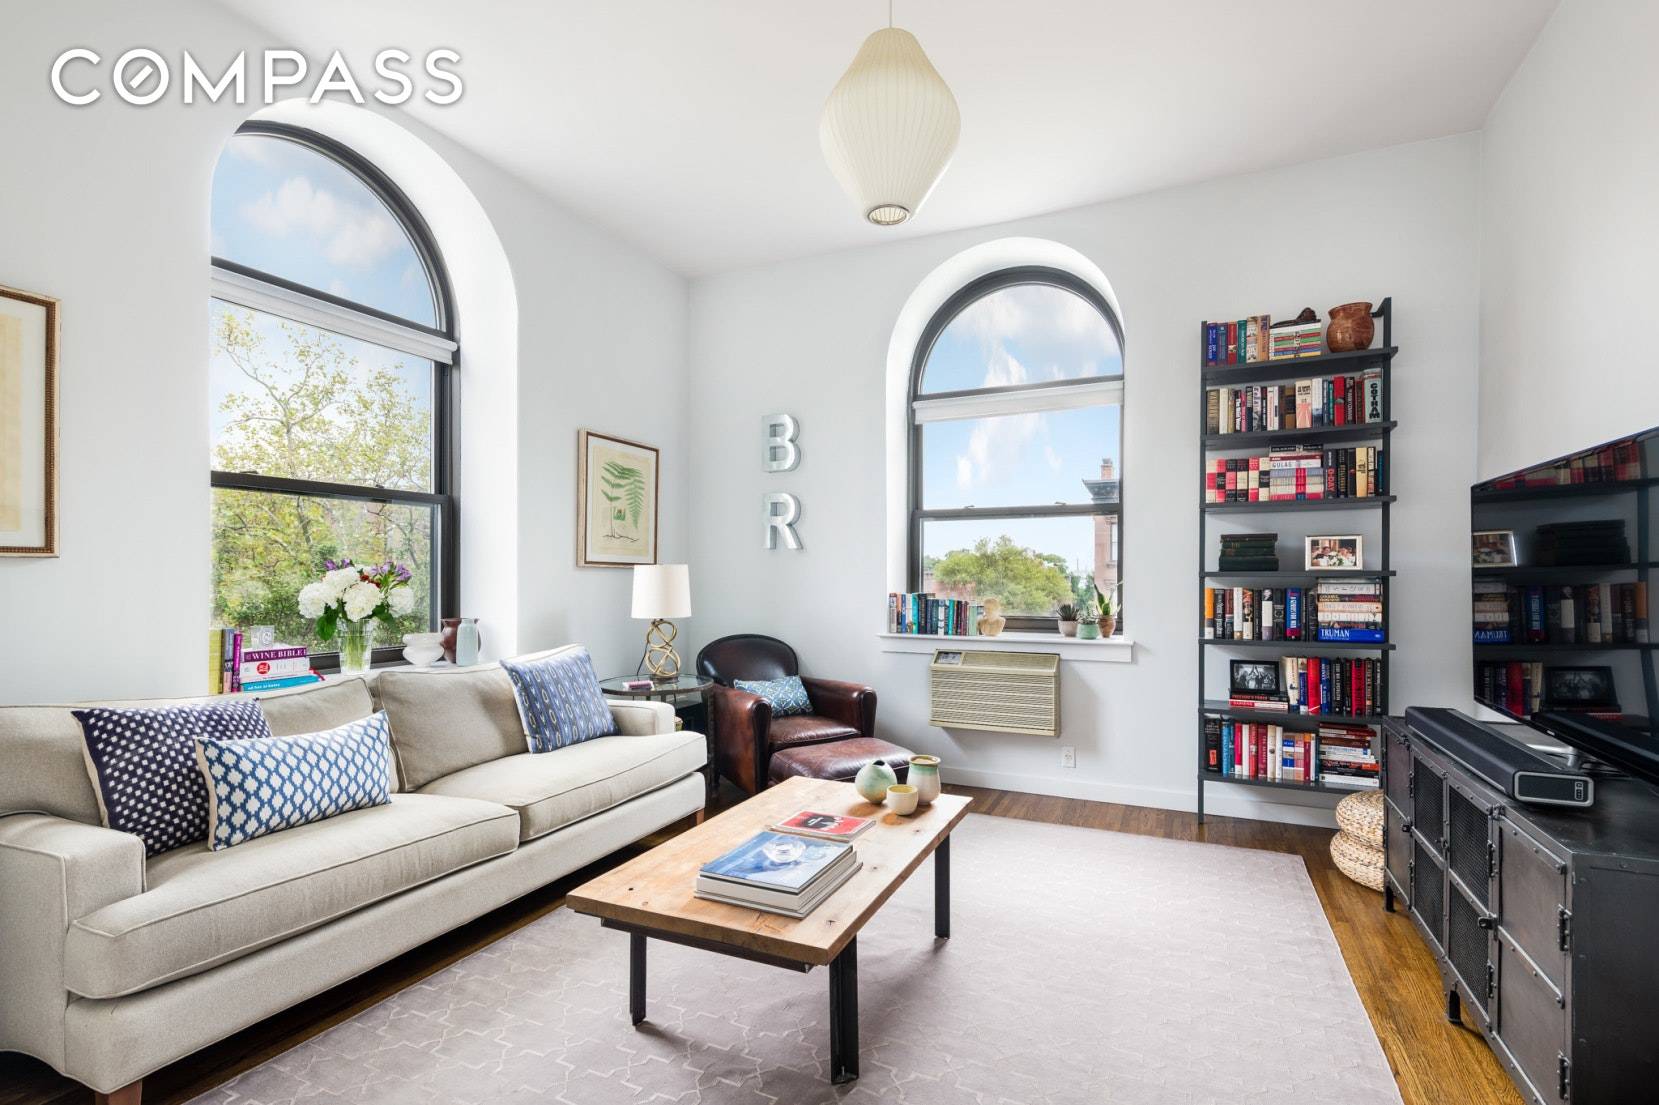 Housed in the steeple of the Old Westminster Church Co Op in the heart of Carroll Gardens, Apartment 4C is a handsomely renovated and spacious apartment.